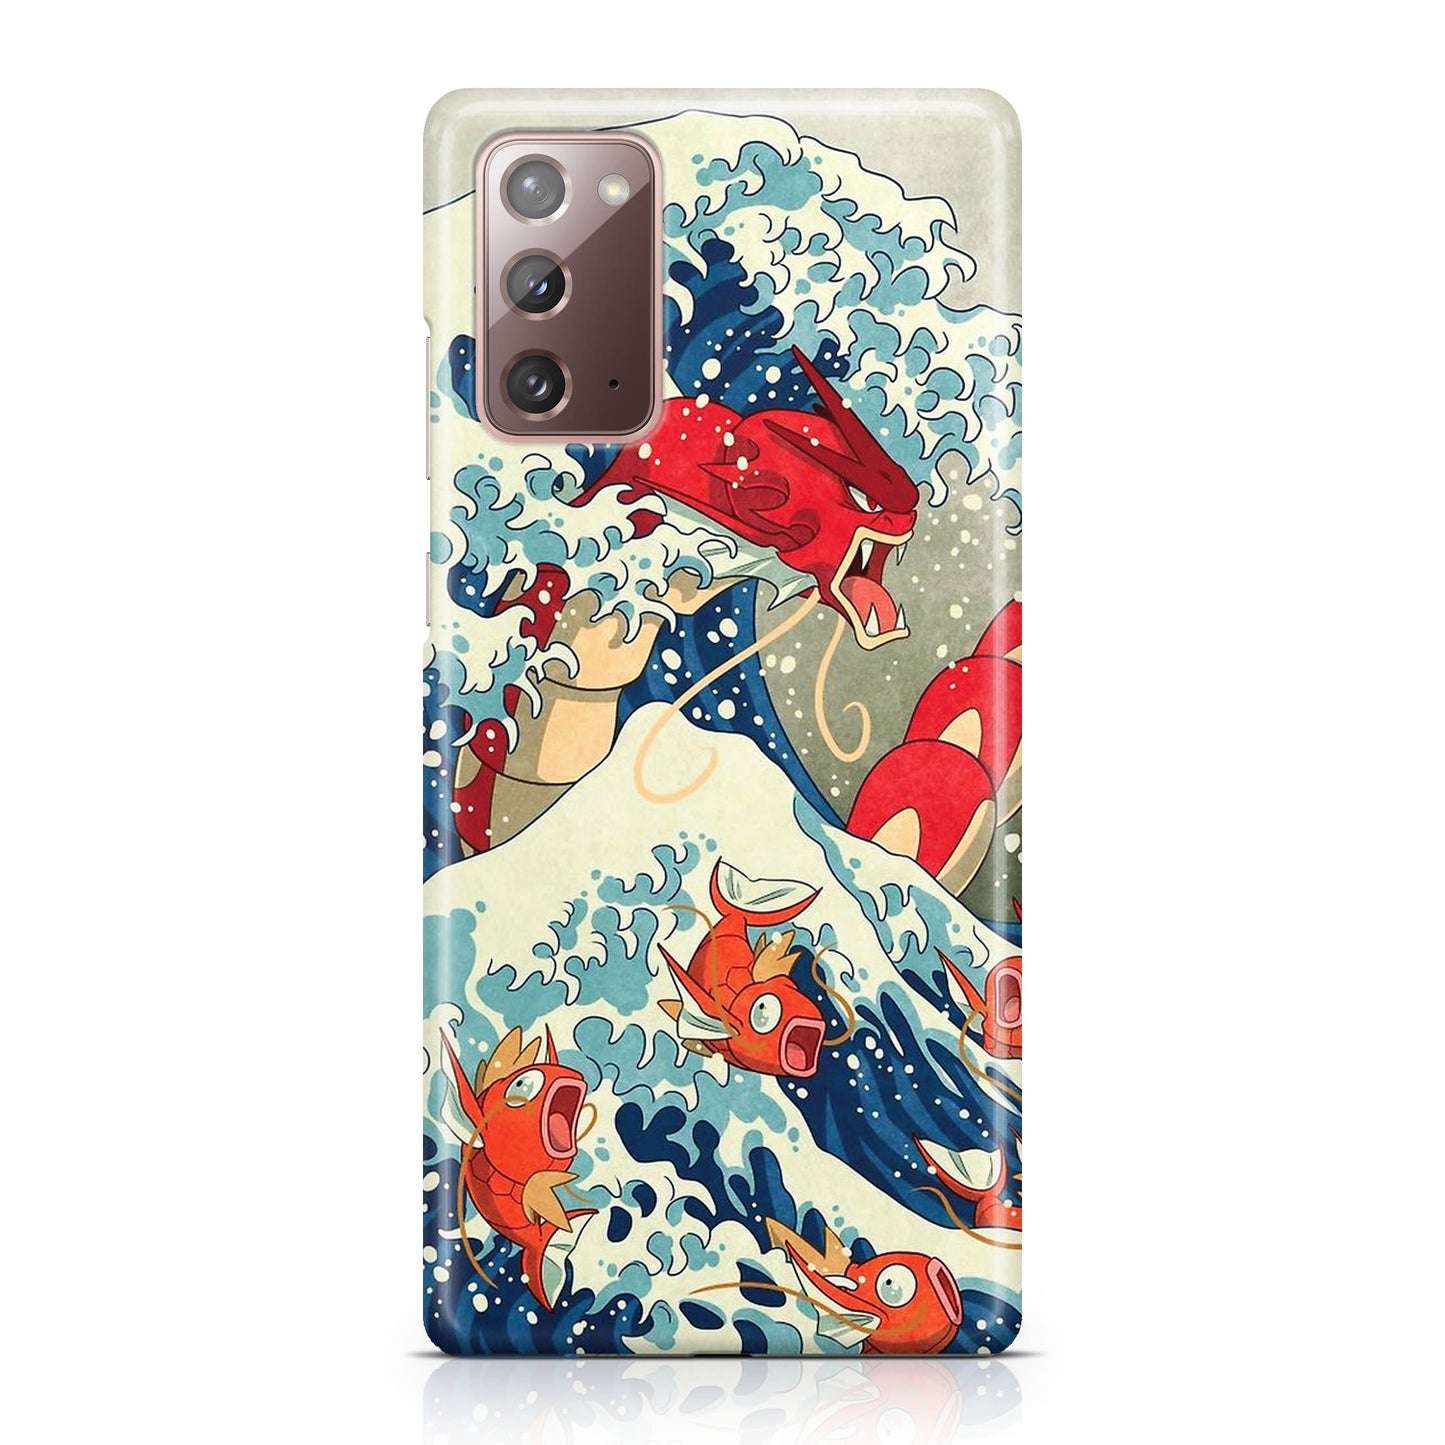 The Great Wave Of Gyarados Galaxy Note 20 Case